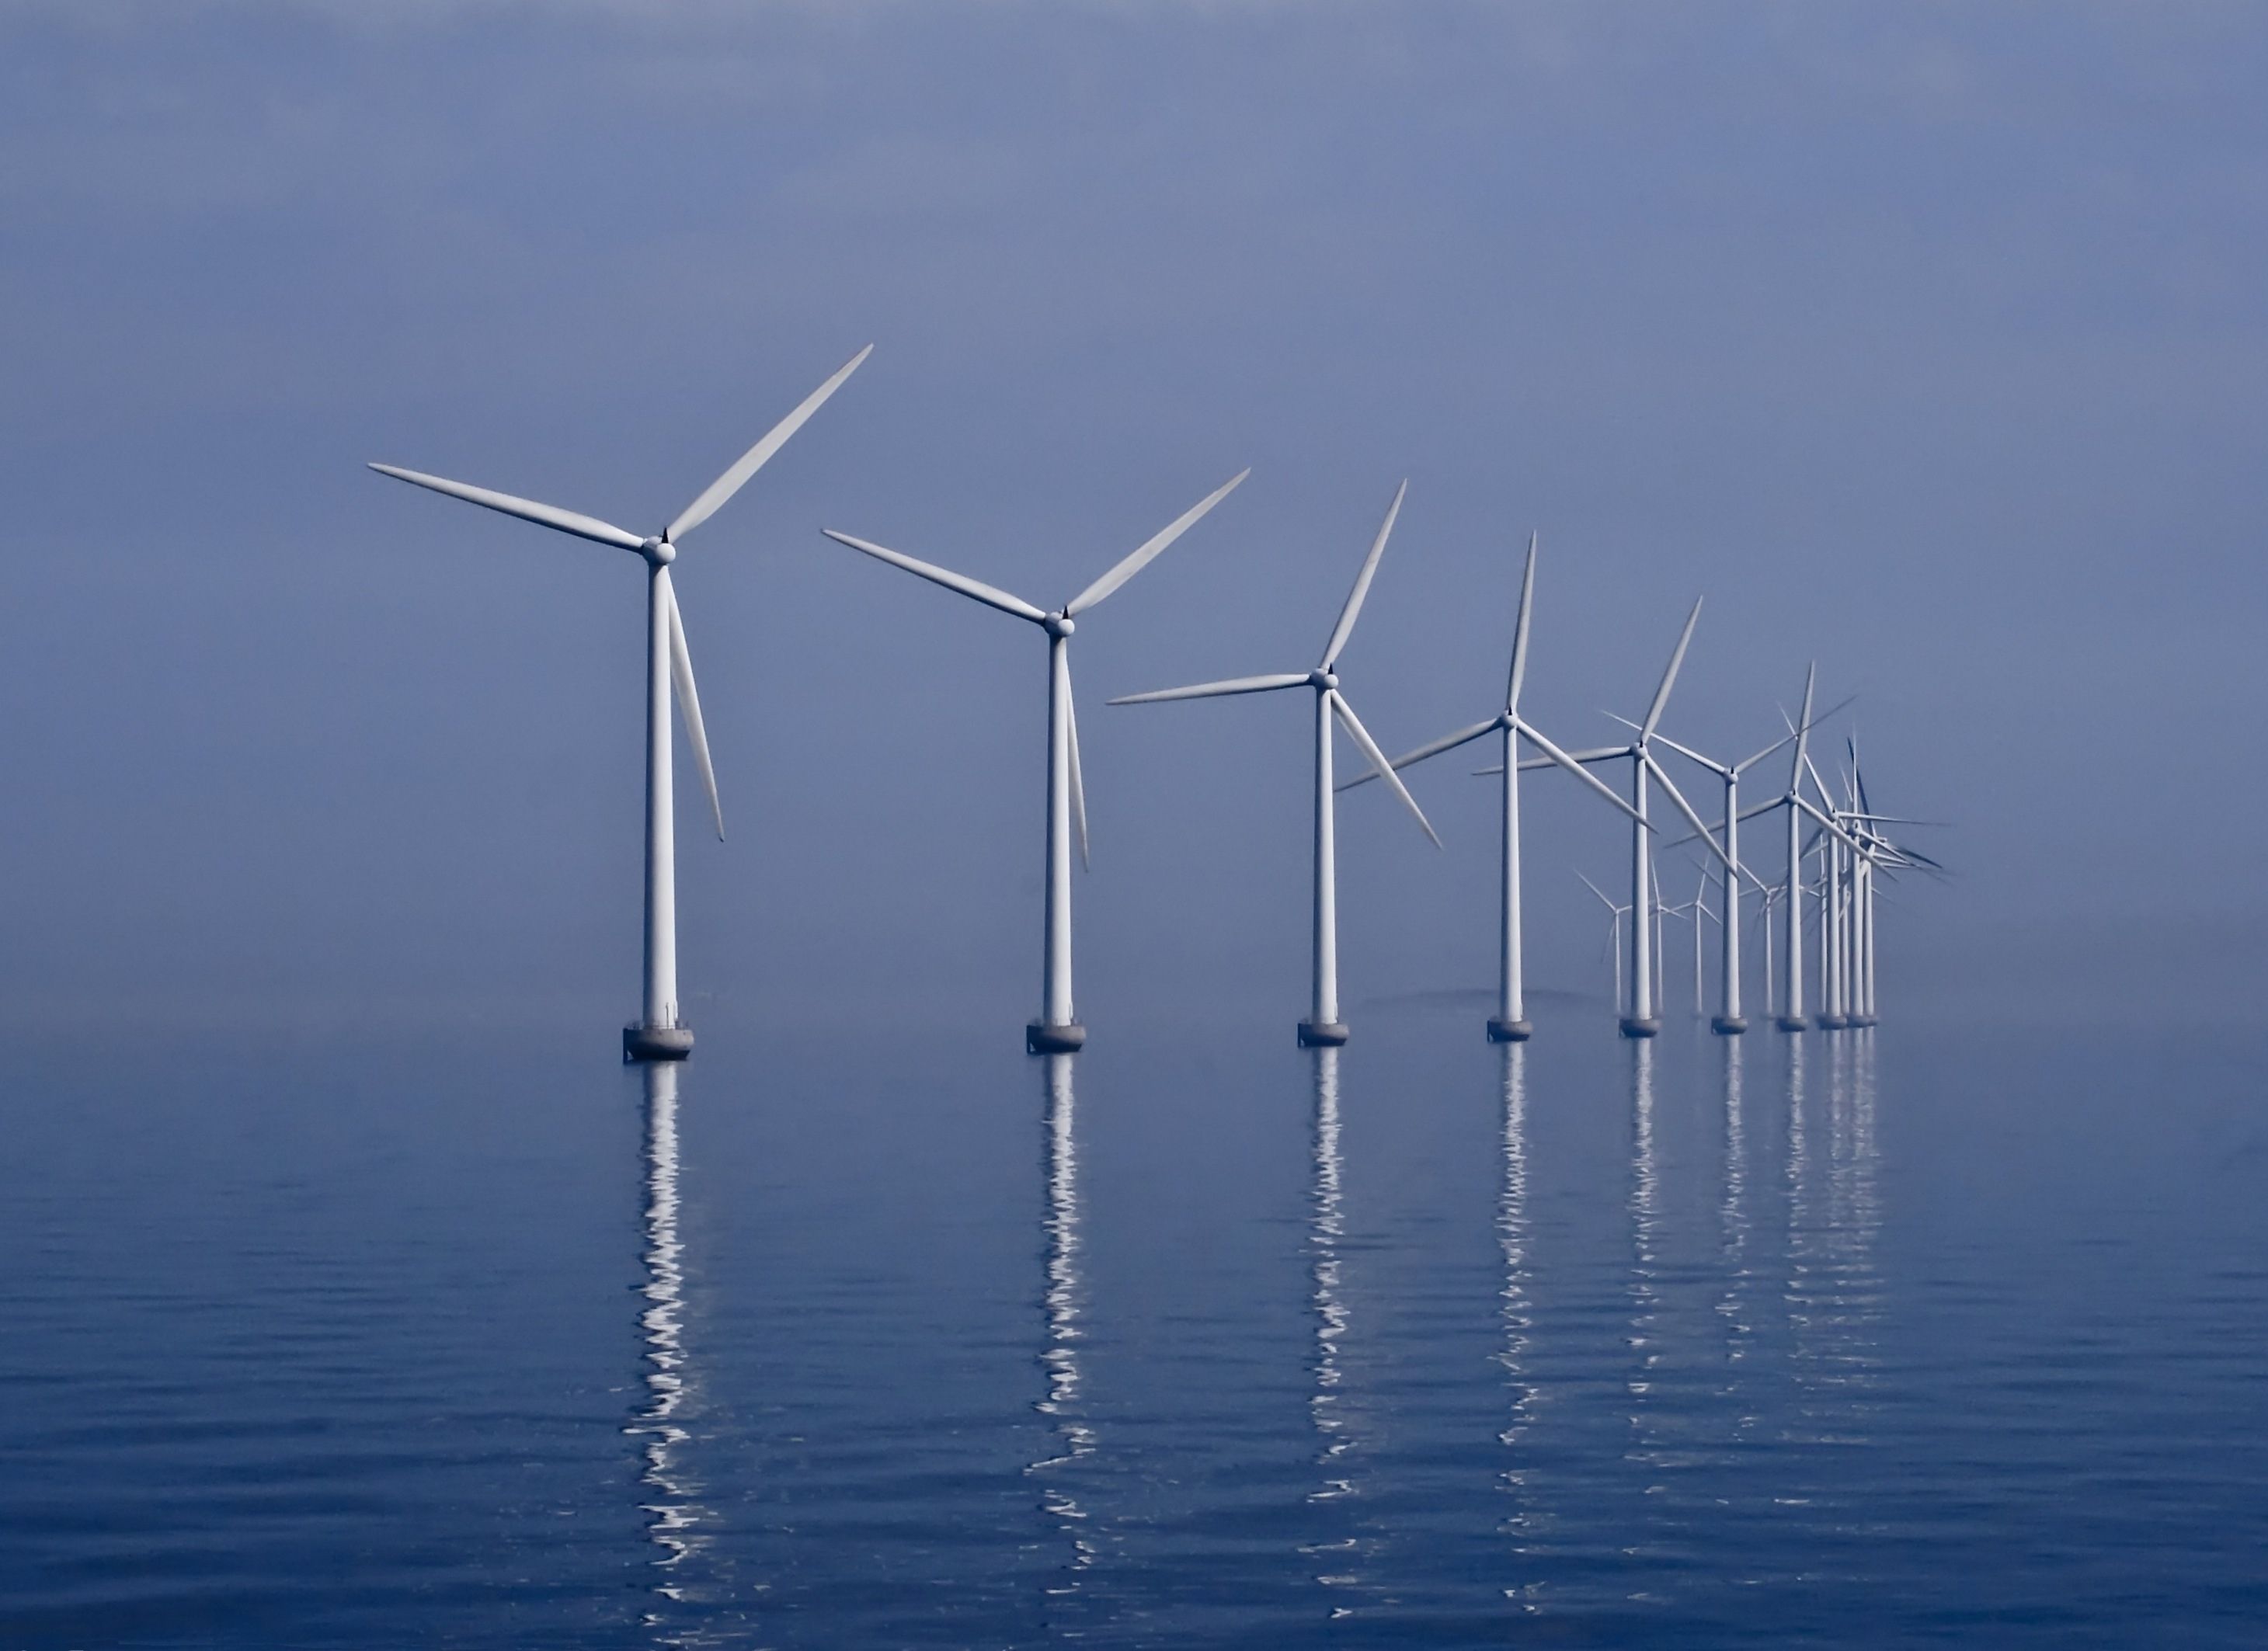 More wind farms could be cropping up near the coast